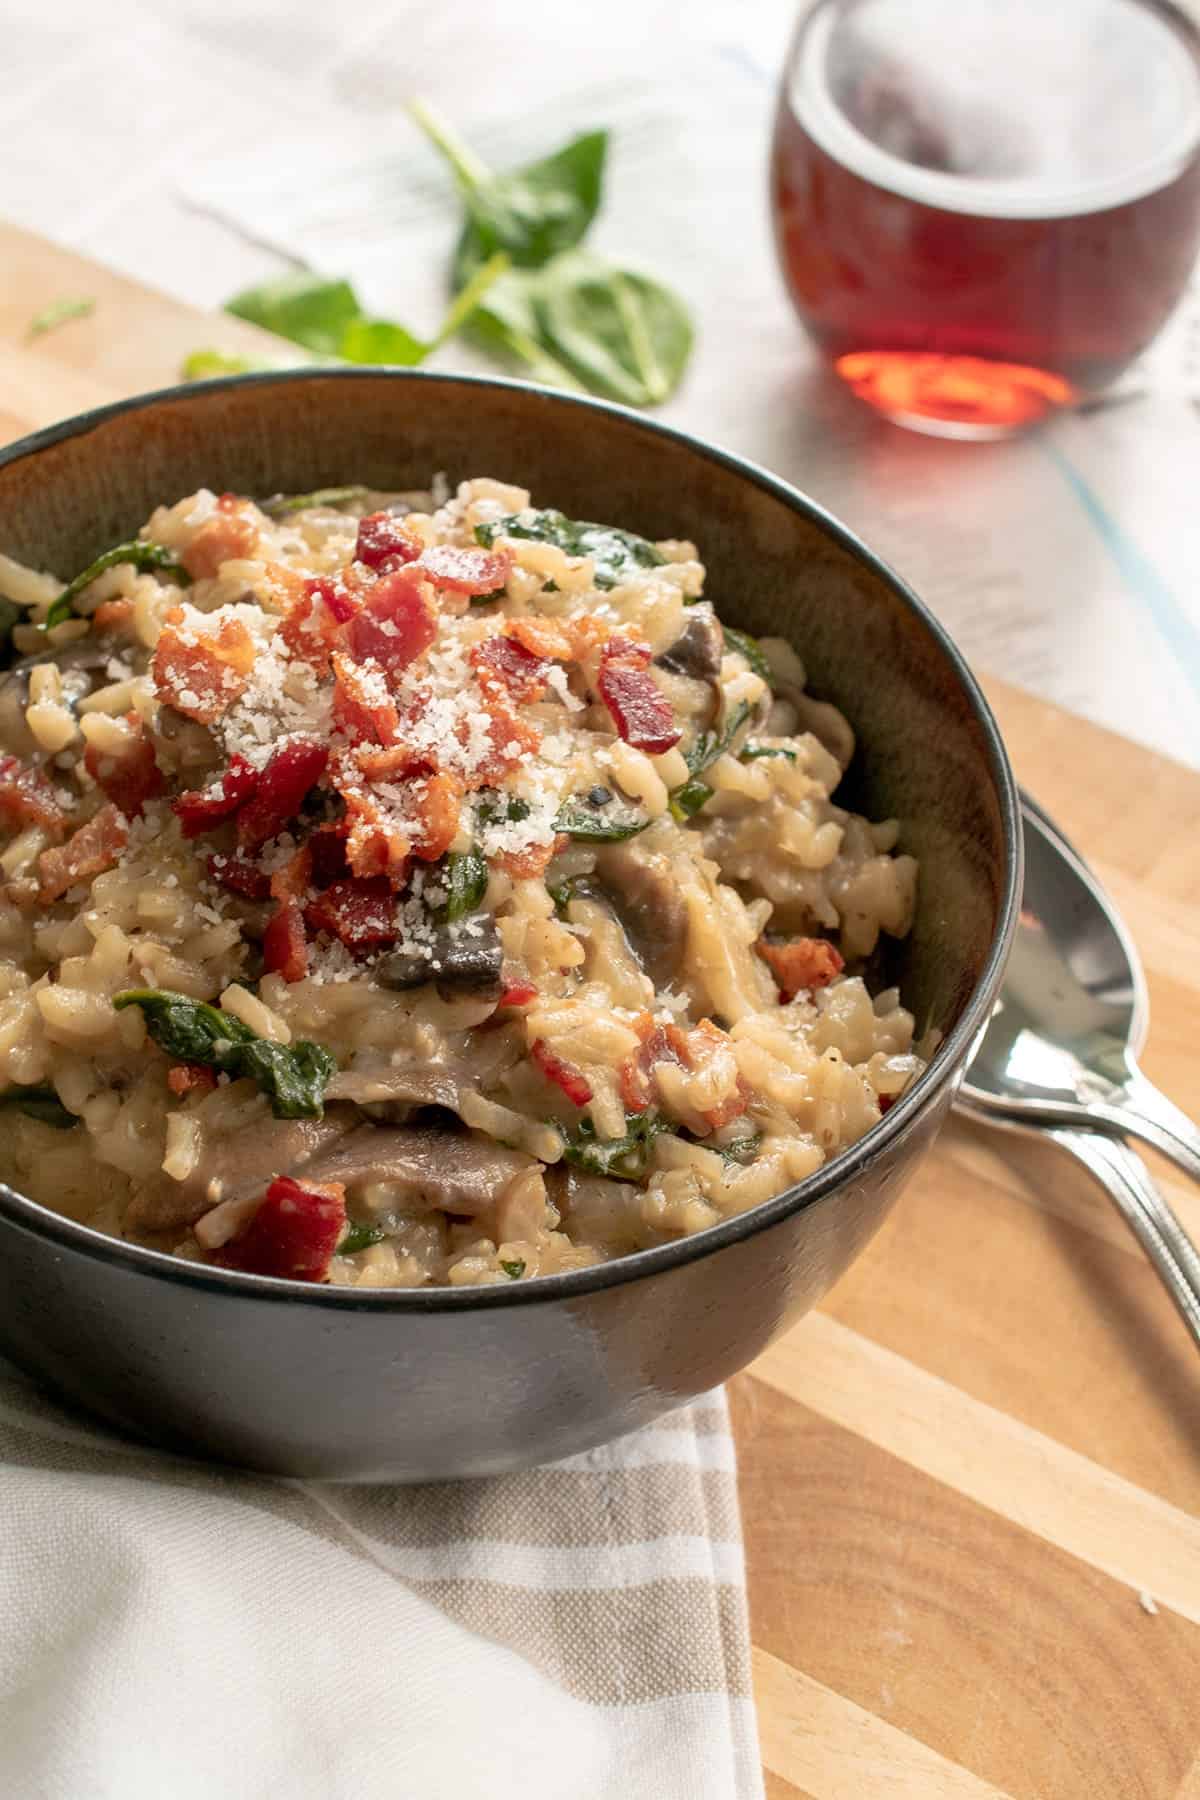 A bowl of bacon mushroom risotto on a wood surface with metal spoons next to it.